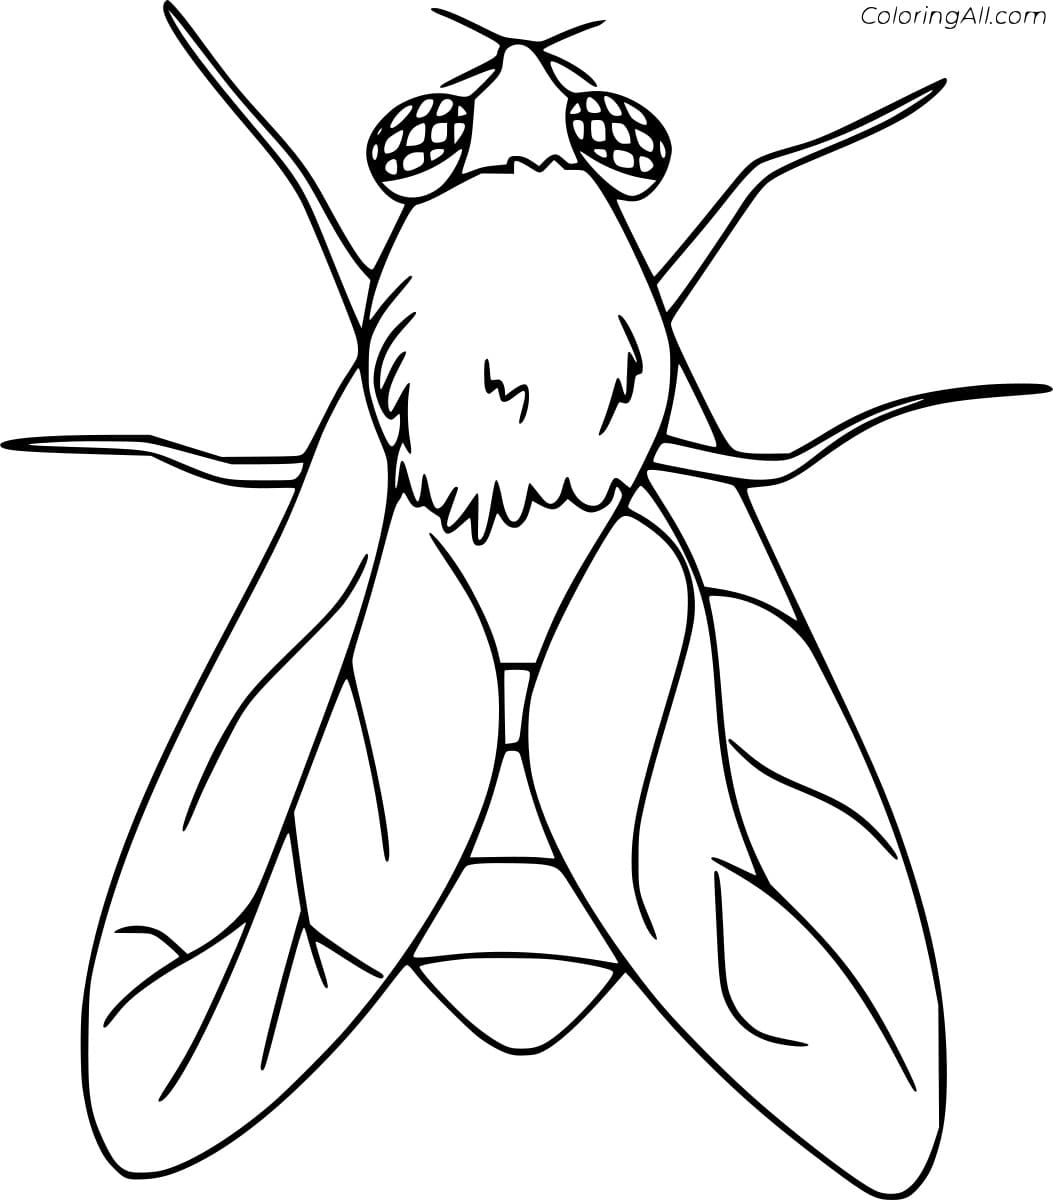 Simple Fly Image